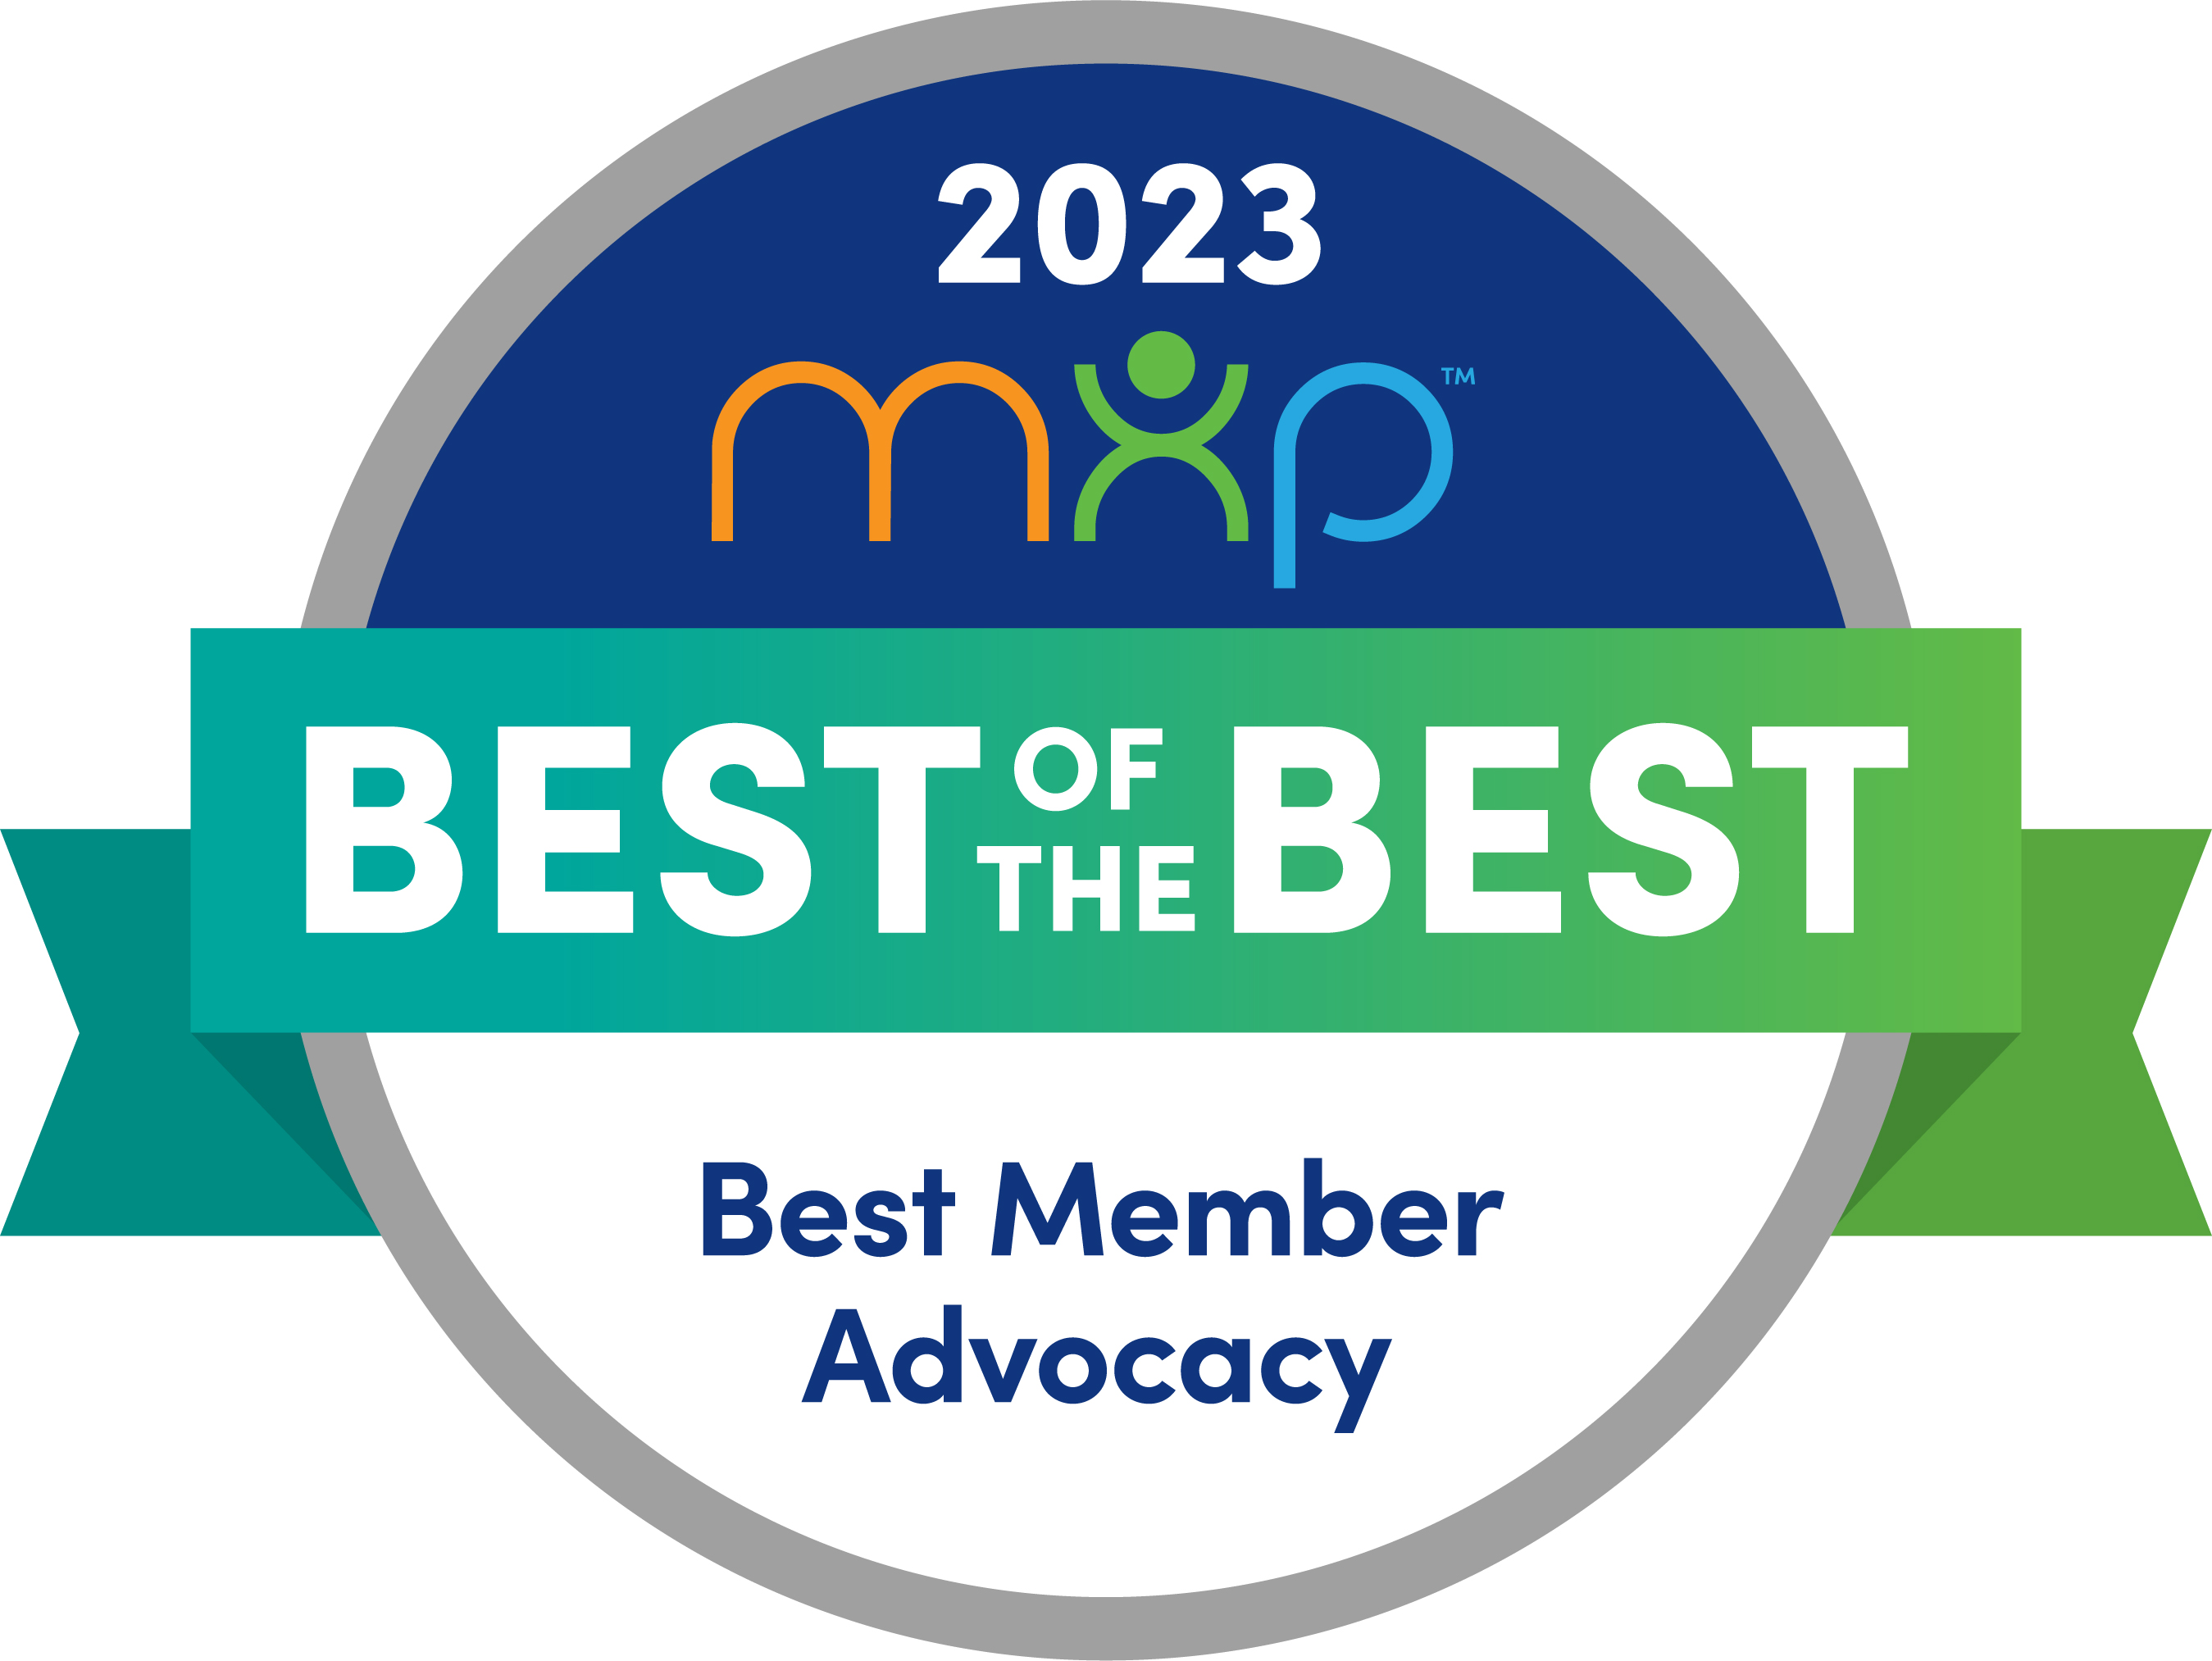 Best of the Best - Member Advocacy Award